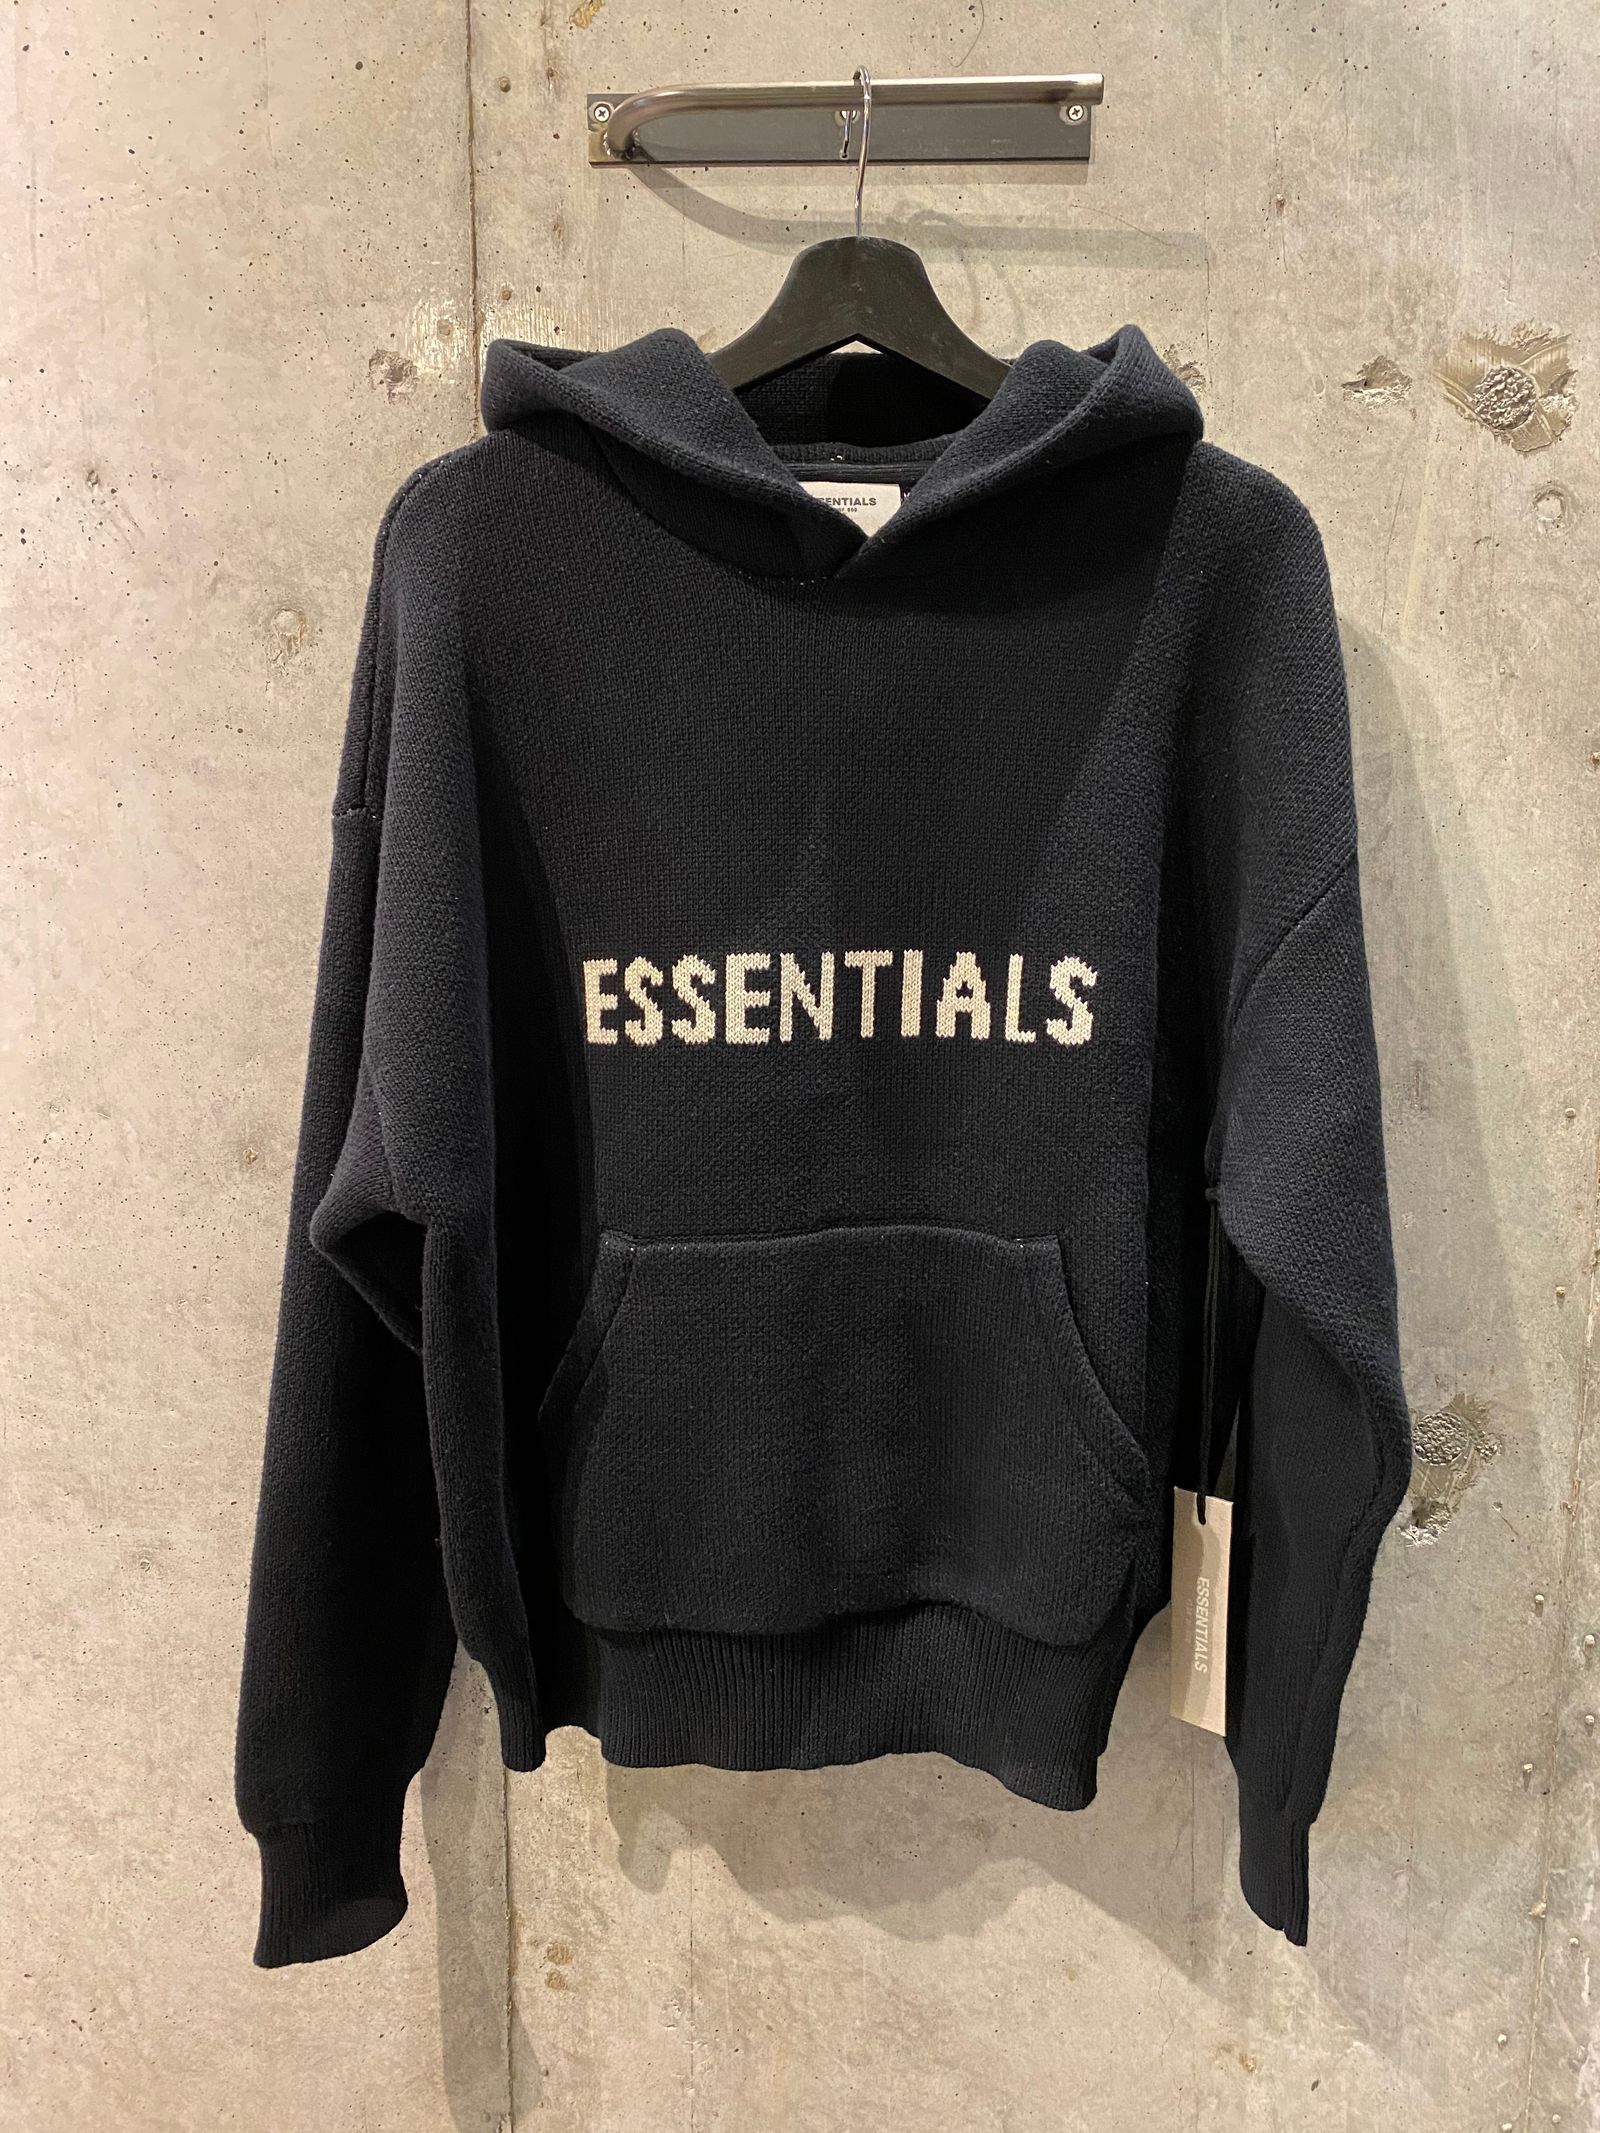 FOG ESSENTIALS KNIT HOODIE/Black | R and another stories